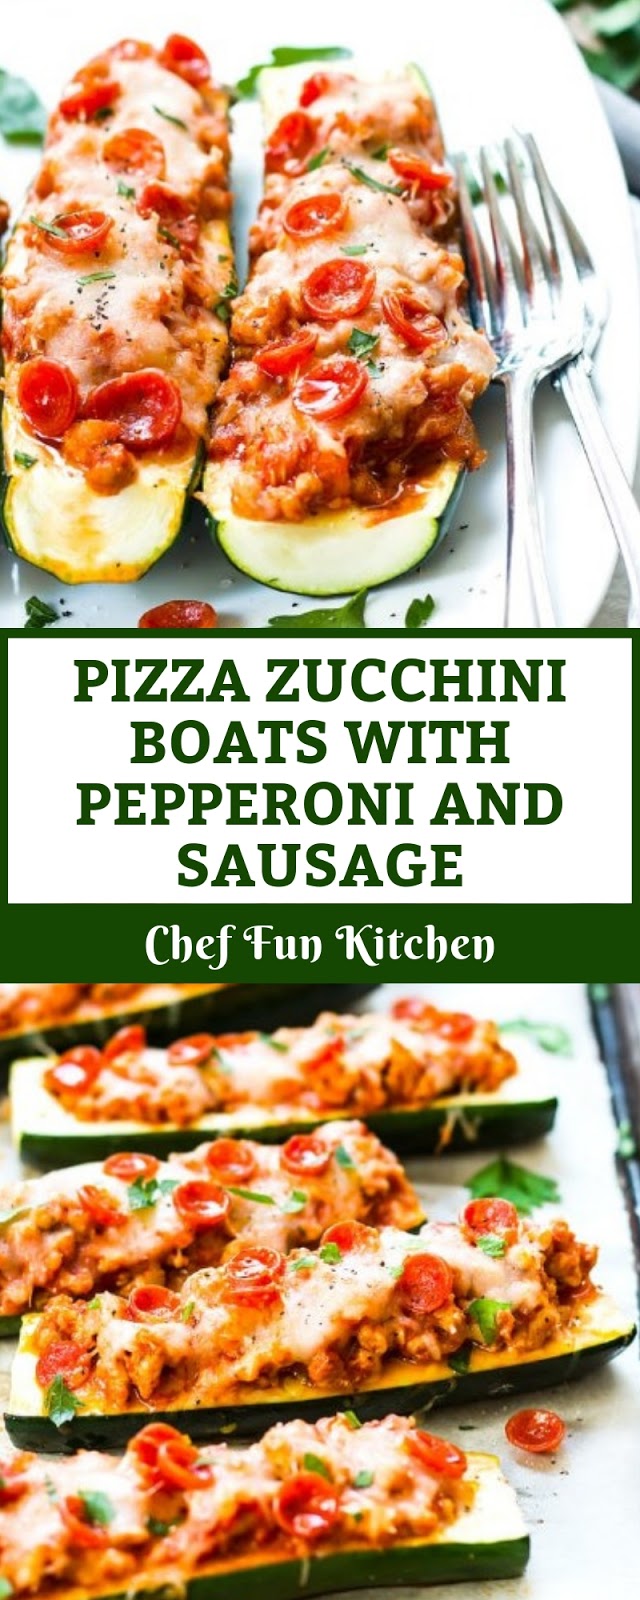 PIZZA ZUCCHINI BOATS WITH PEPPERONI AND SAUSAGE